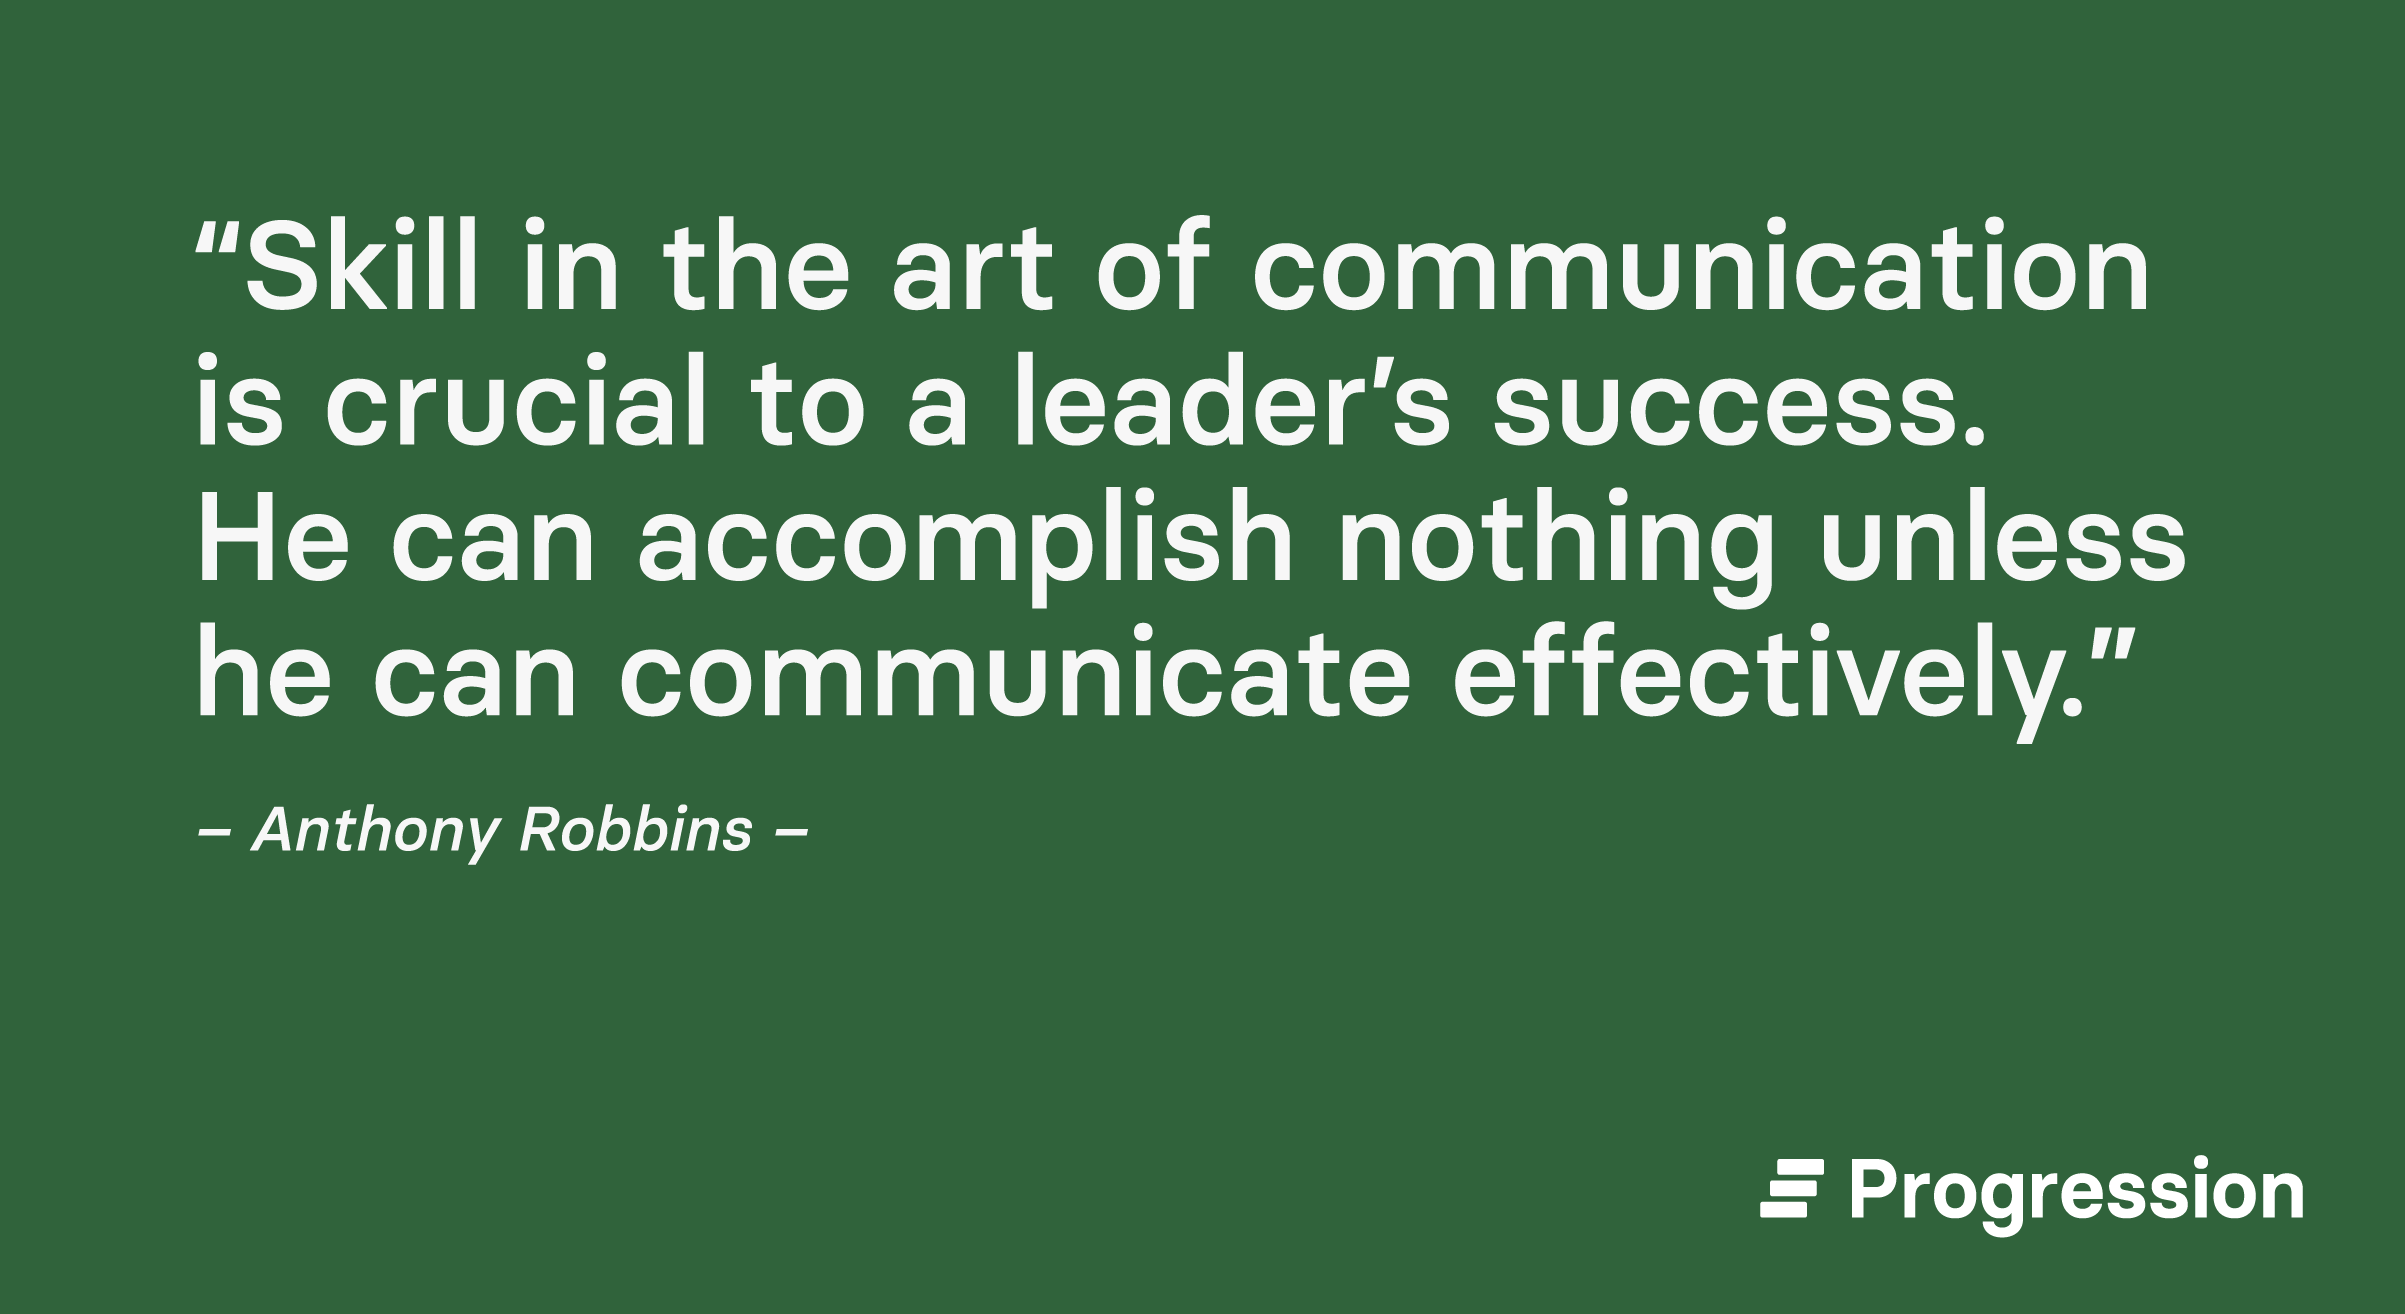 An Anthony Robbins quote on communication